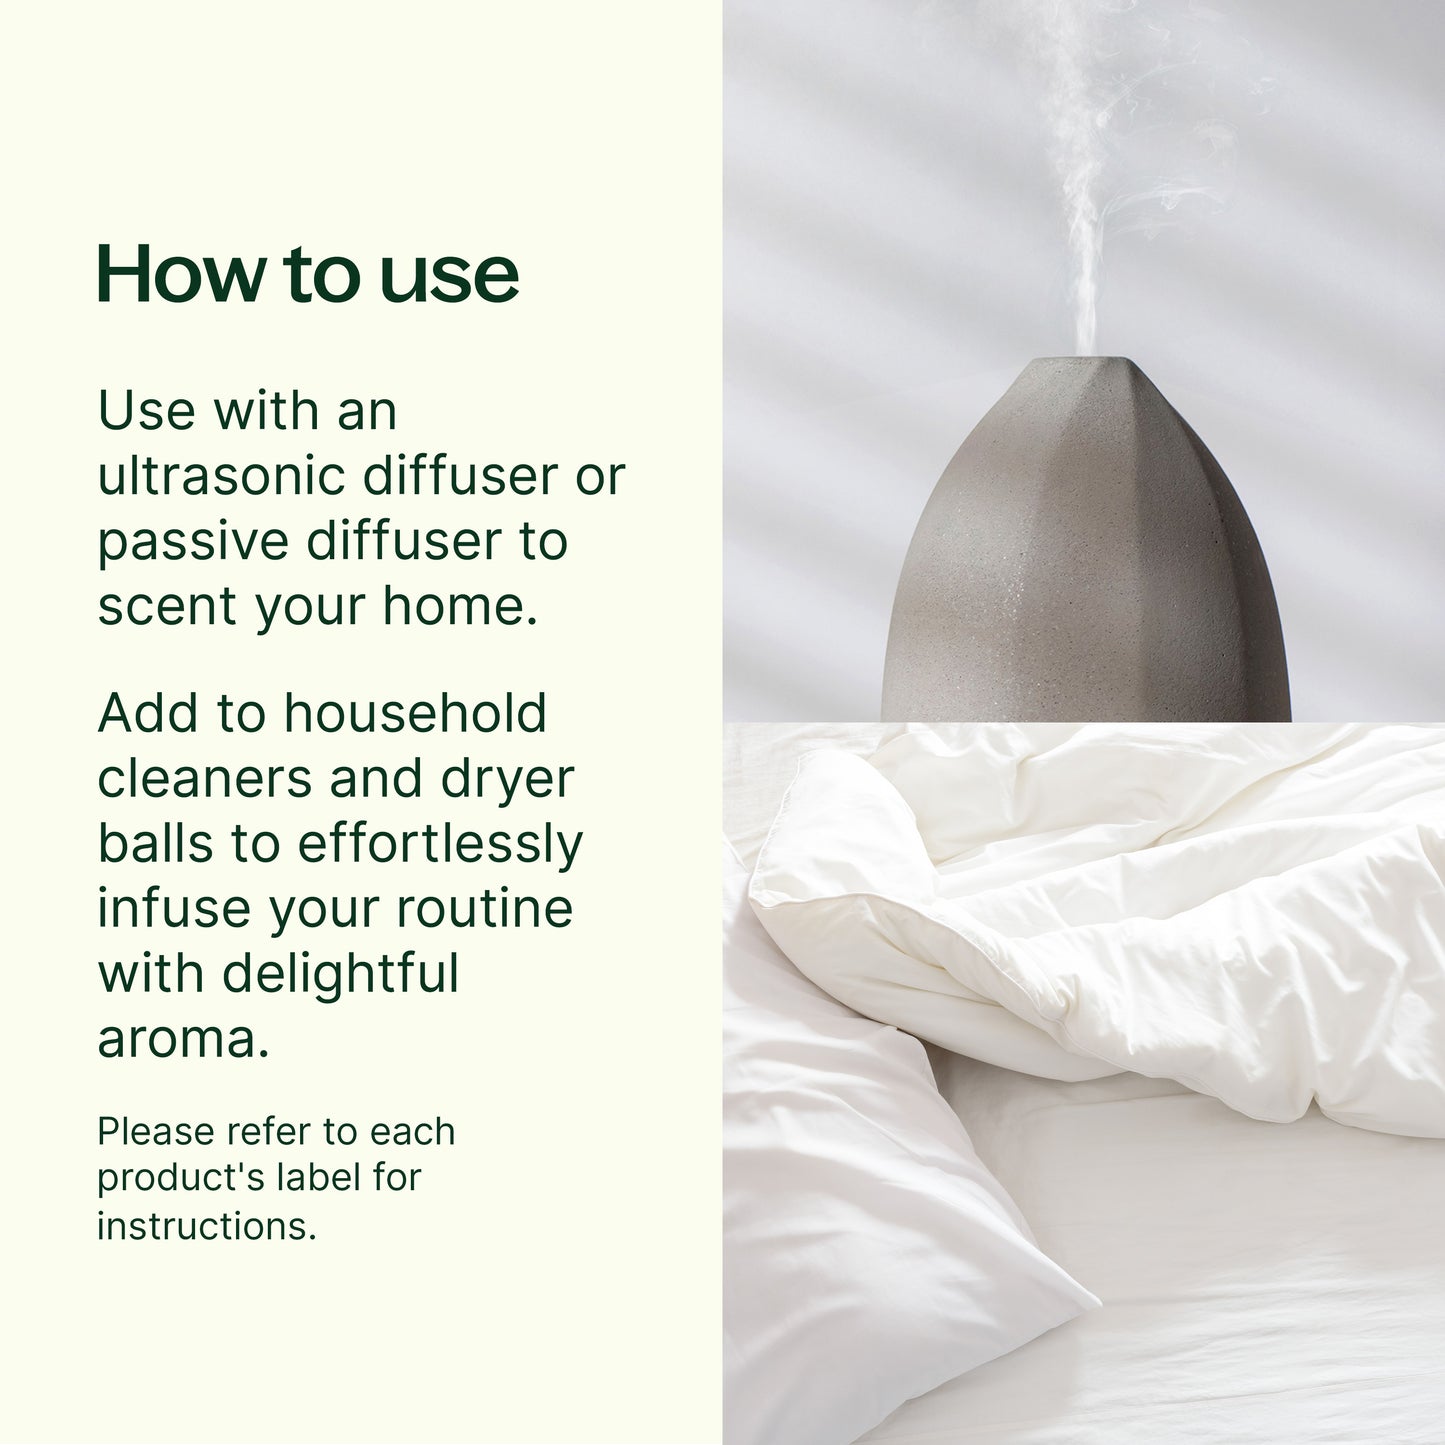 how to use: use with an ultrasonic diffuser or passive diffuser to scent your home. They can also be added to body oils, creams and lotions. Please refer to each product's label for aromatic and topical usage instructions